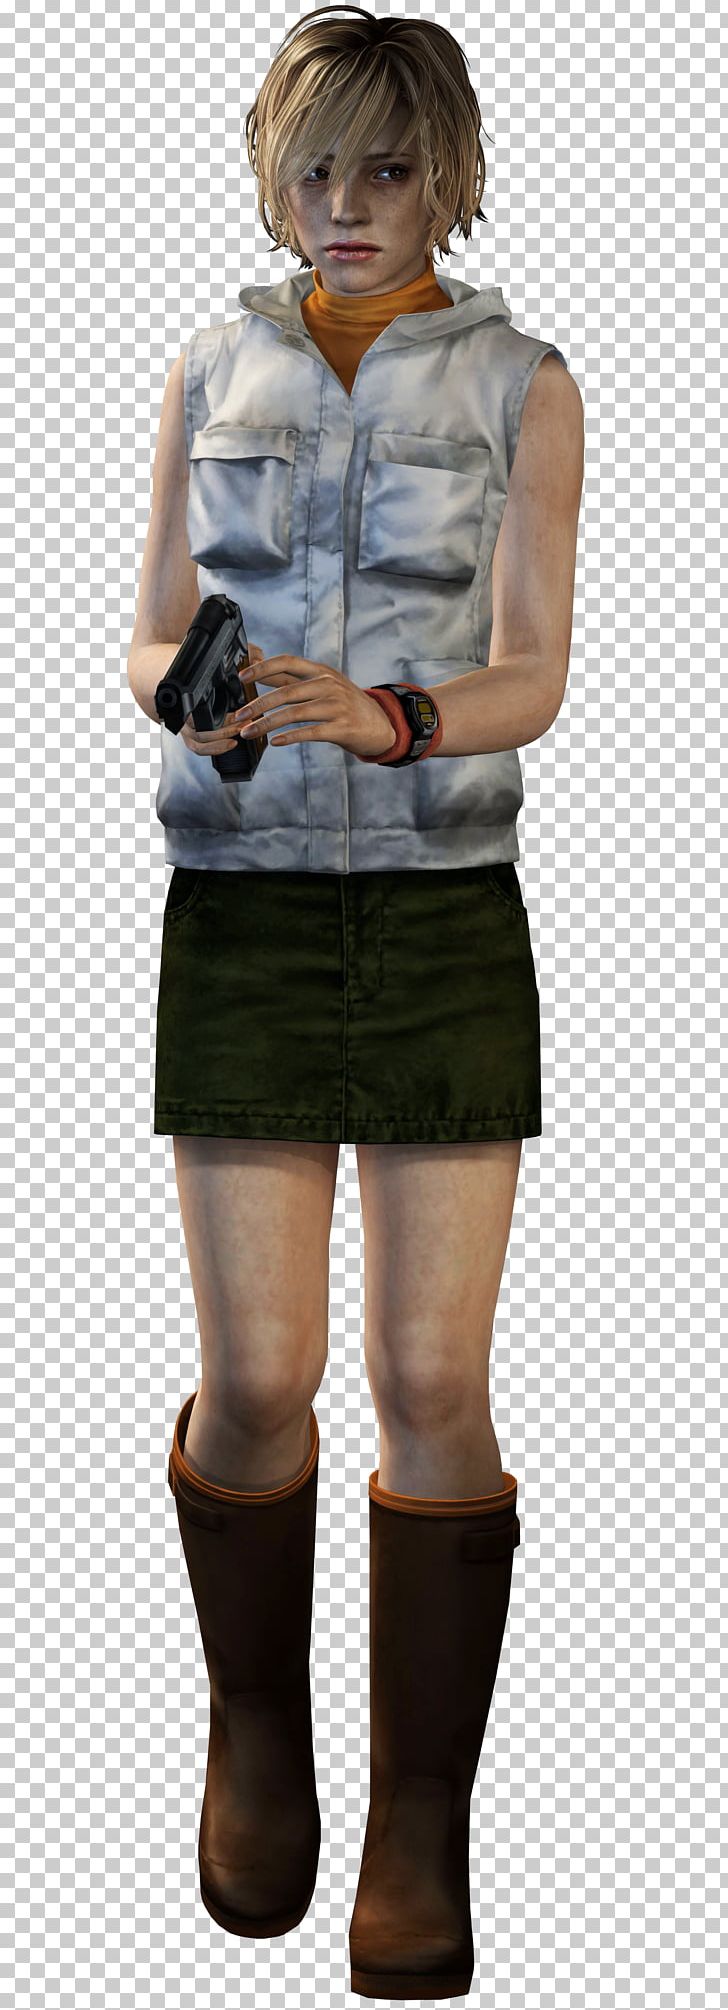 Silent Hill 3 Heather Mason Silent Hill 2 Alessa Gillespie PNG, Clipart, Abdomen, Alessa Gillespie, Arm, Art, Character Free PNG Download